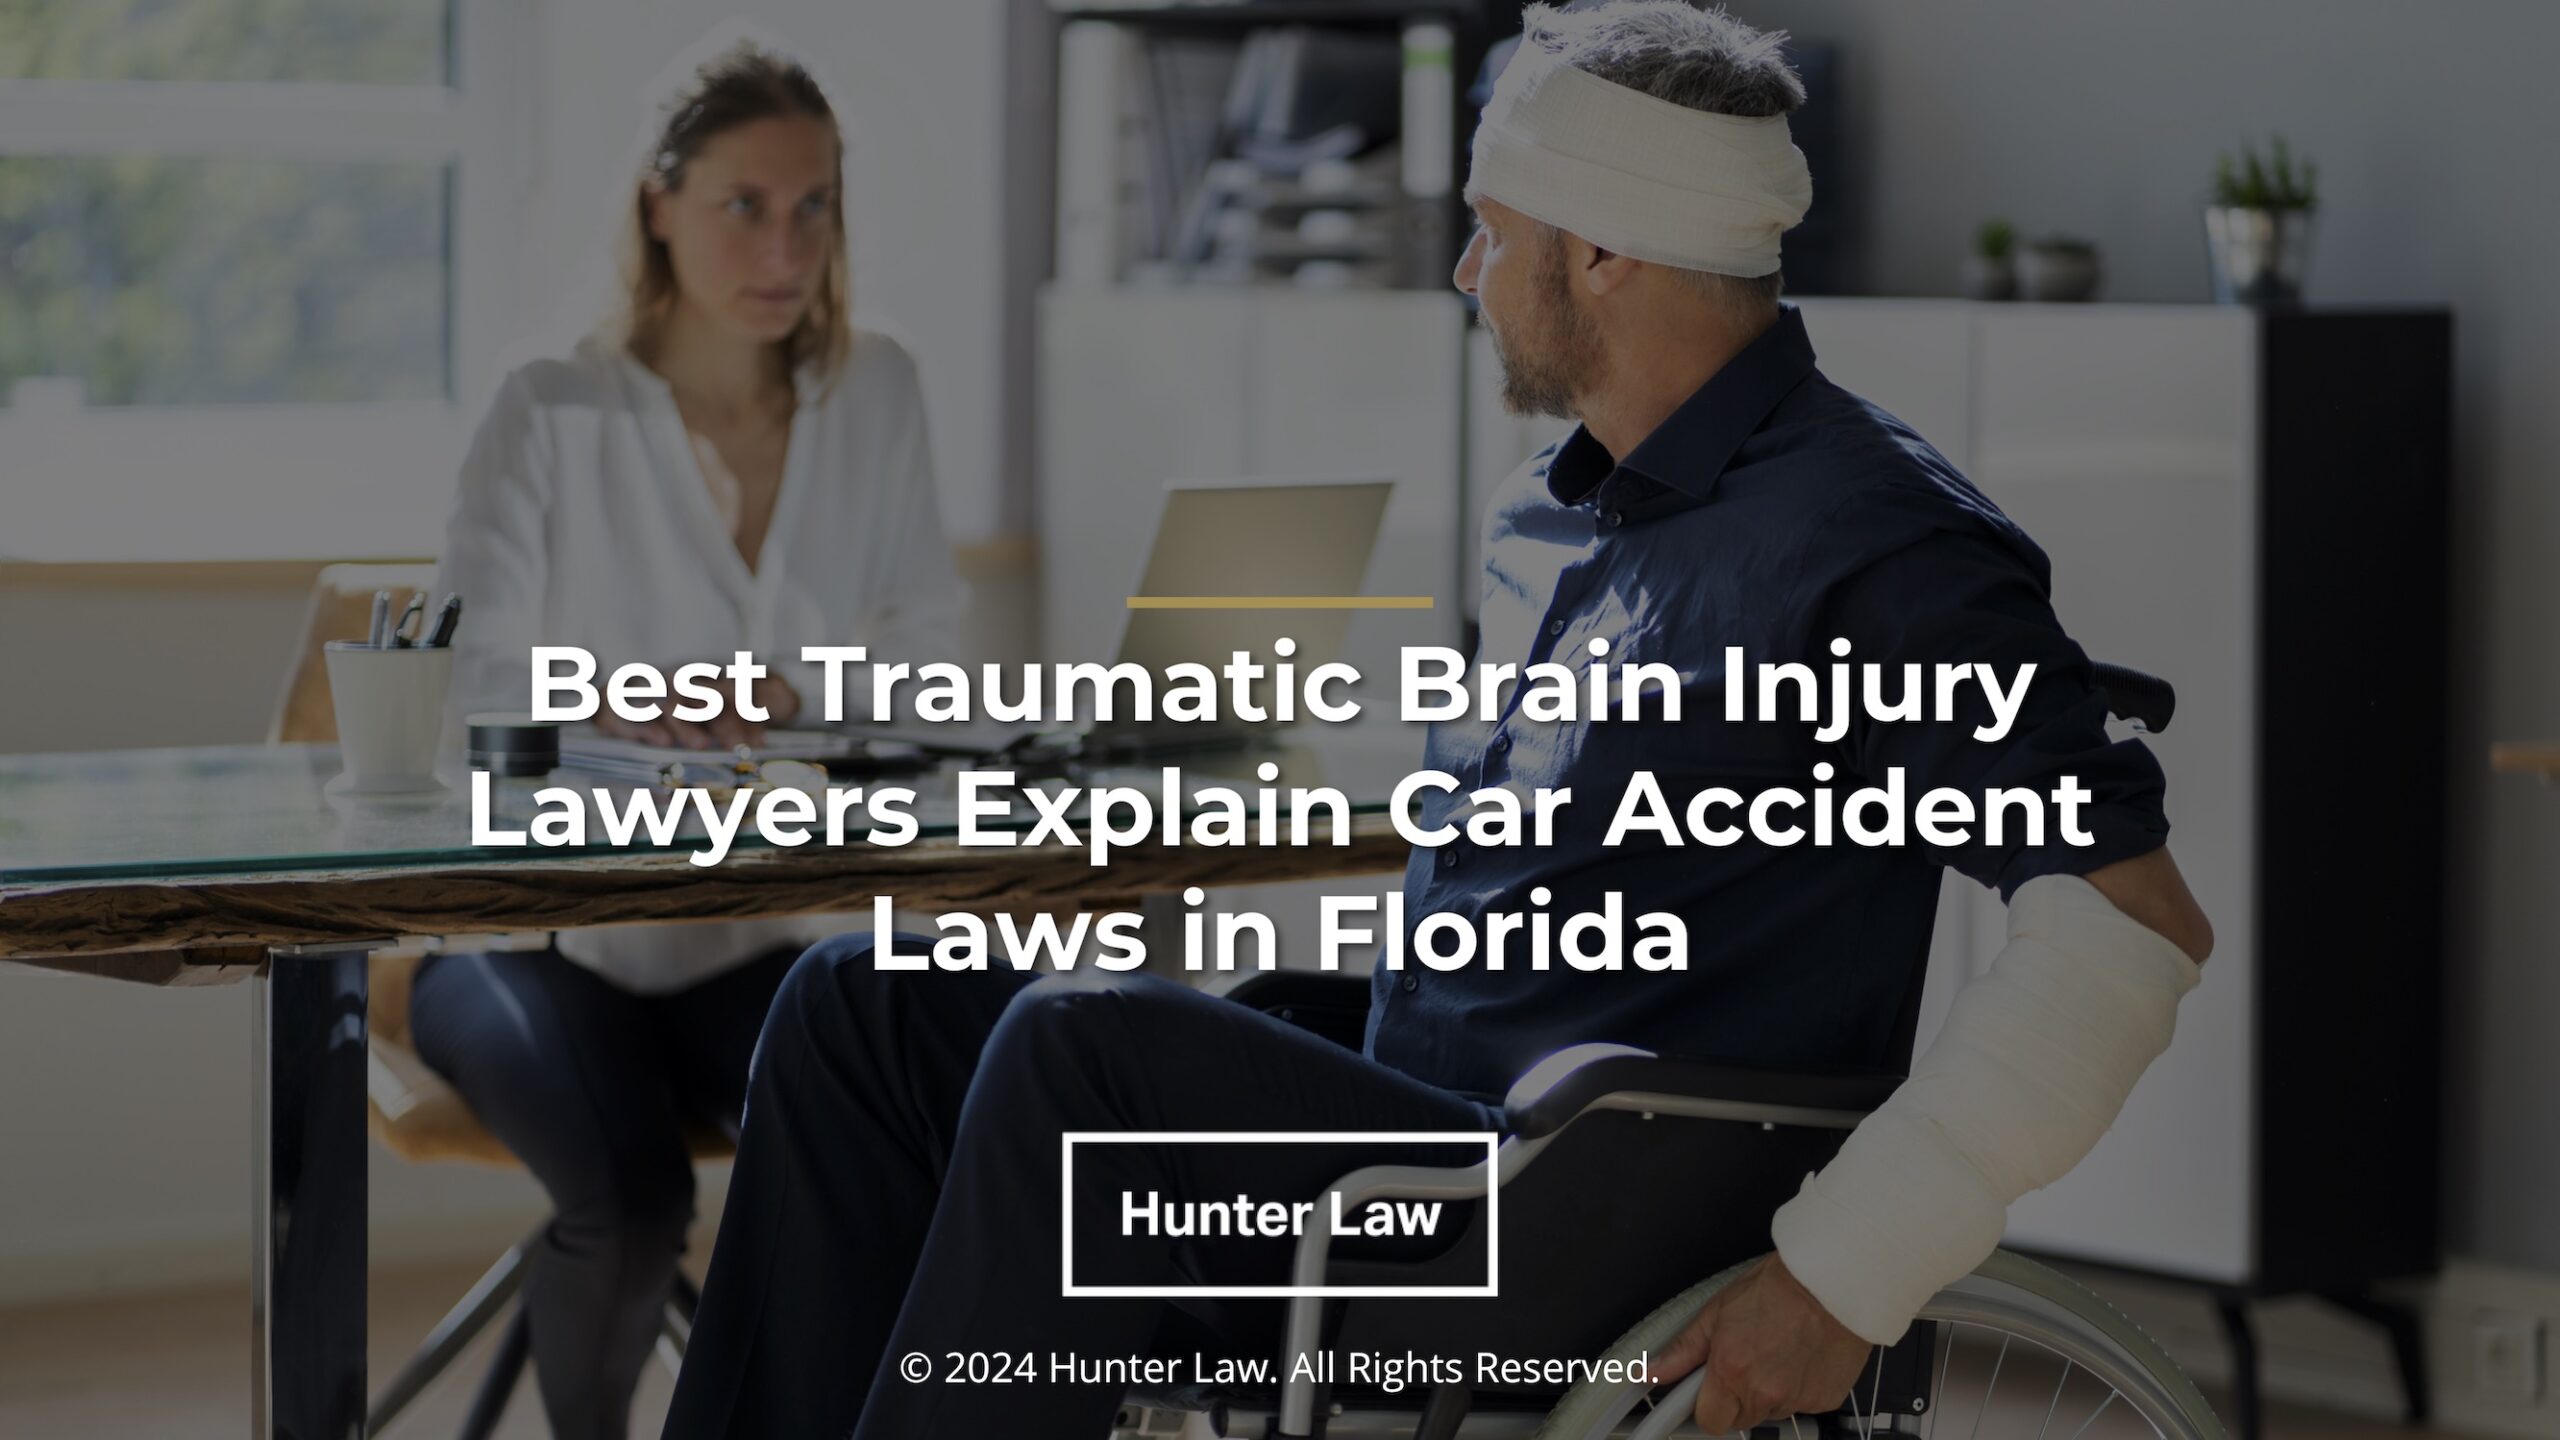 Featured: Male traumatic brain injury victim in wheelchair at consultation: Best Traumatic Brain Injury Lawyers Explain Car Accident Laws in Florida